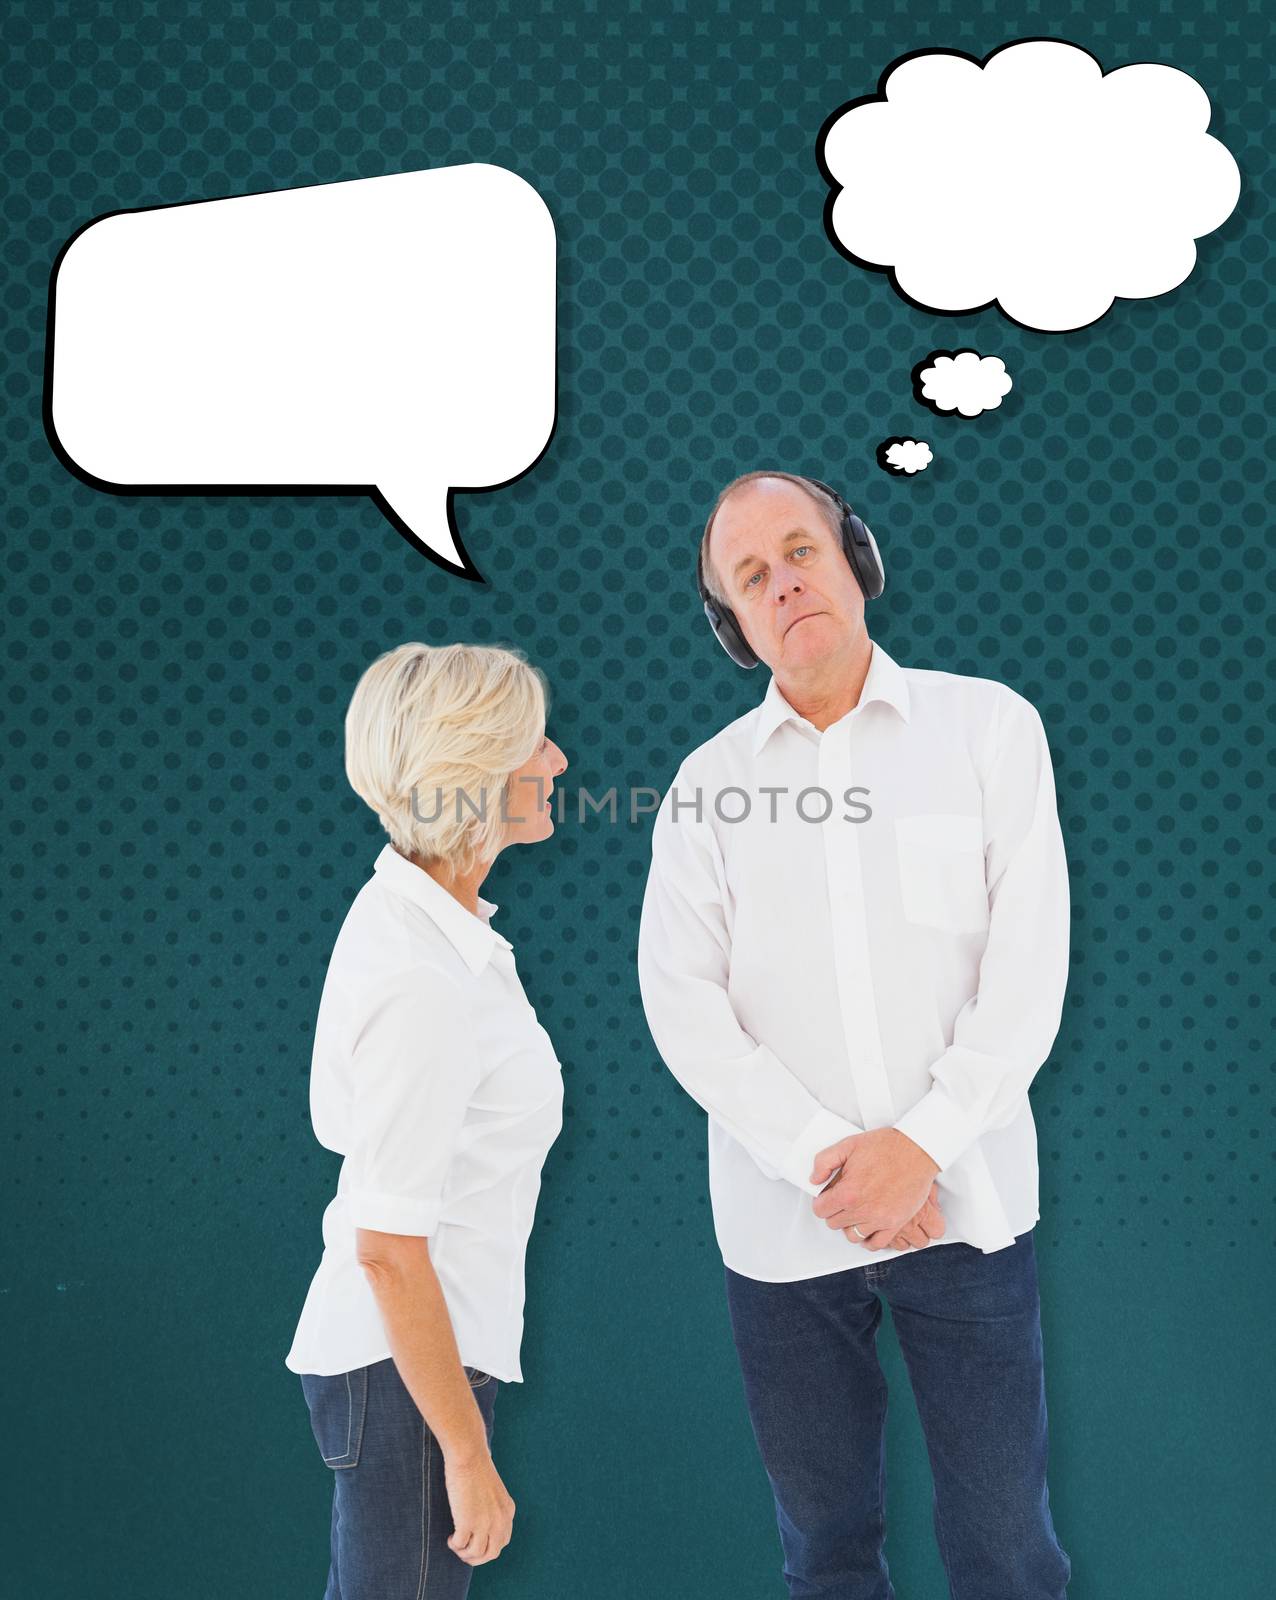 Annoyed woman being ignored by her partner against teal